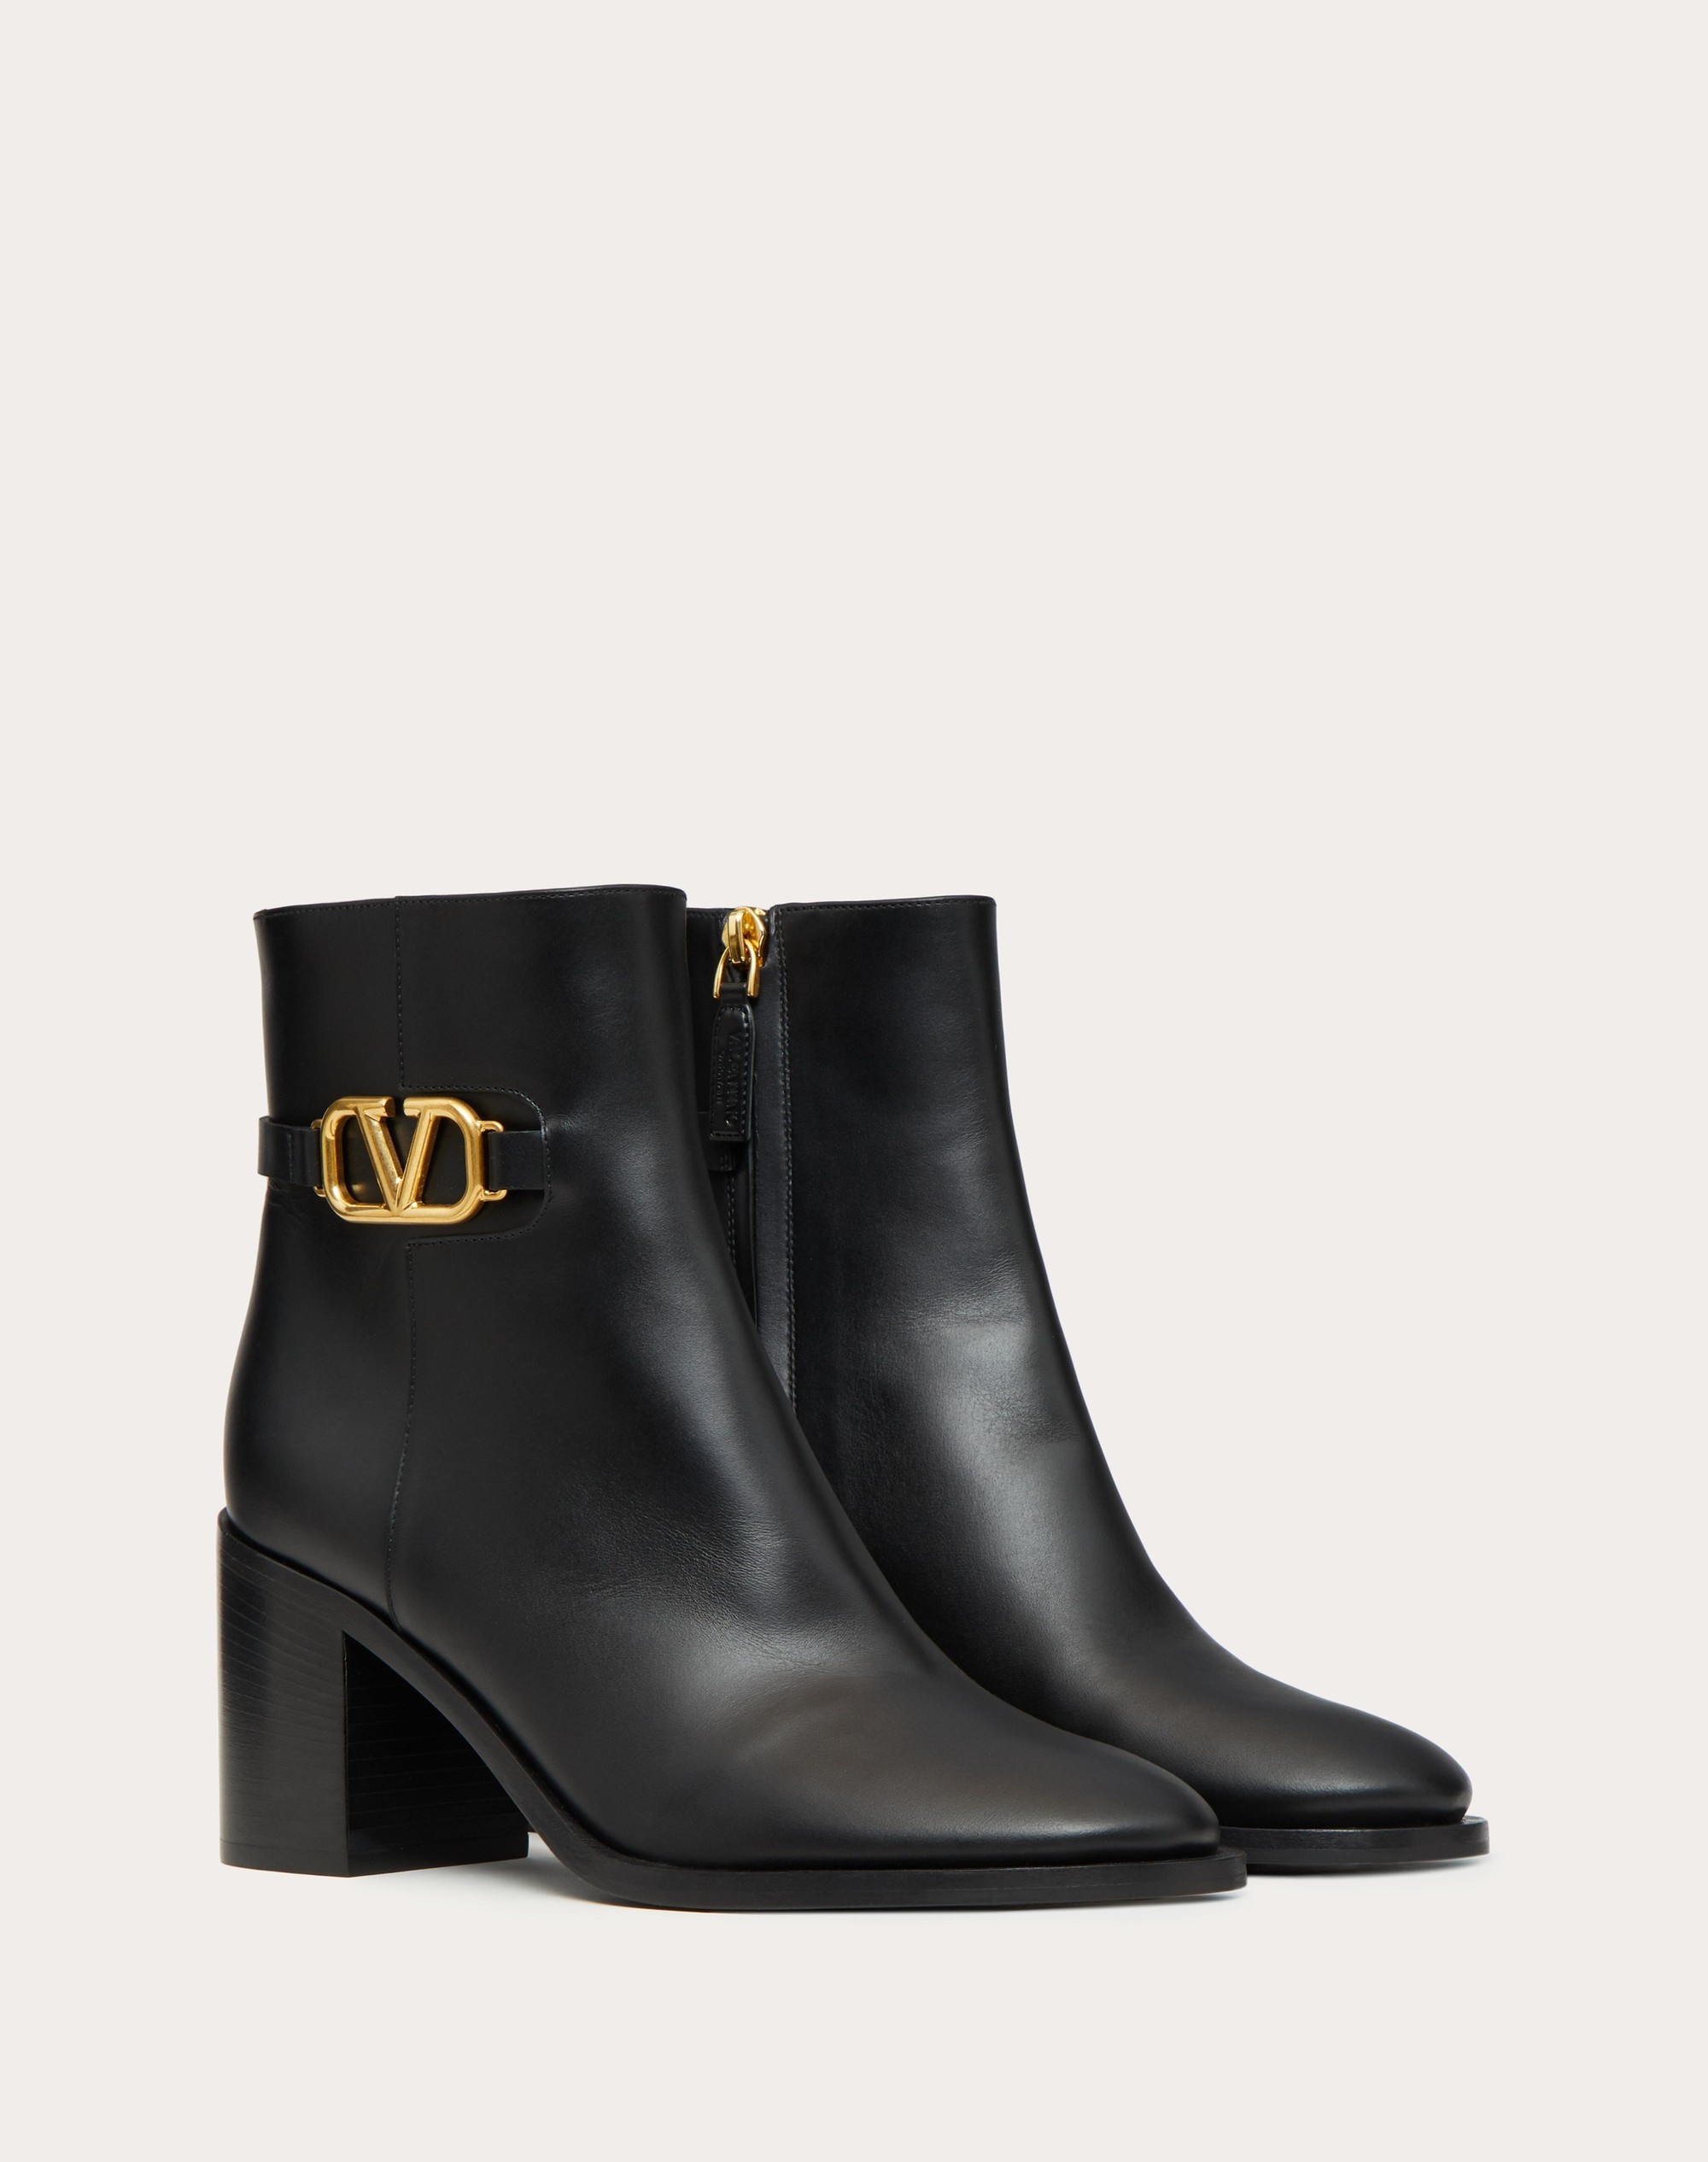 VLOGO SIGNATURE CALFSKIN ANKLE BOOT 75MM - 2